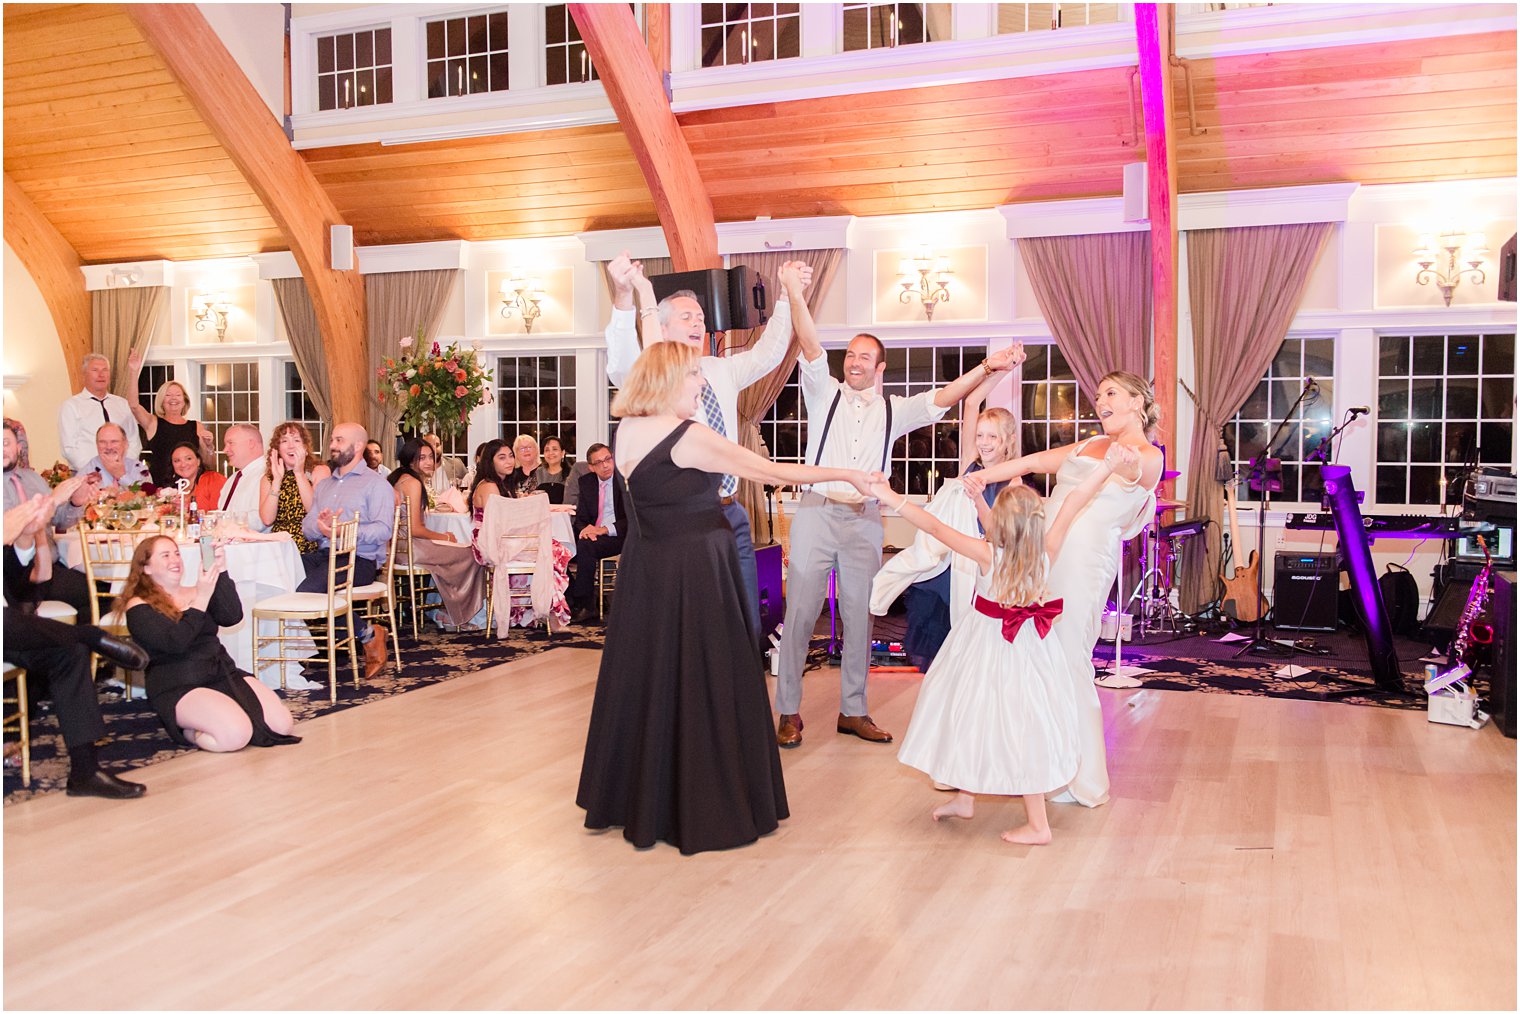 family dances together during New Jersey wedding reception